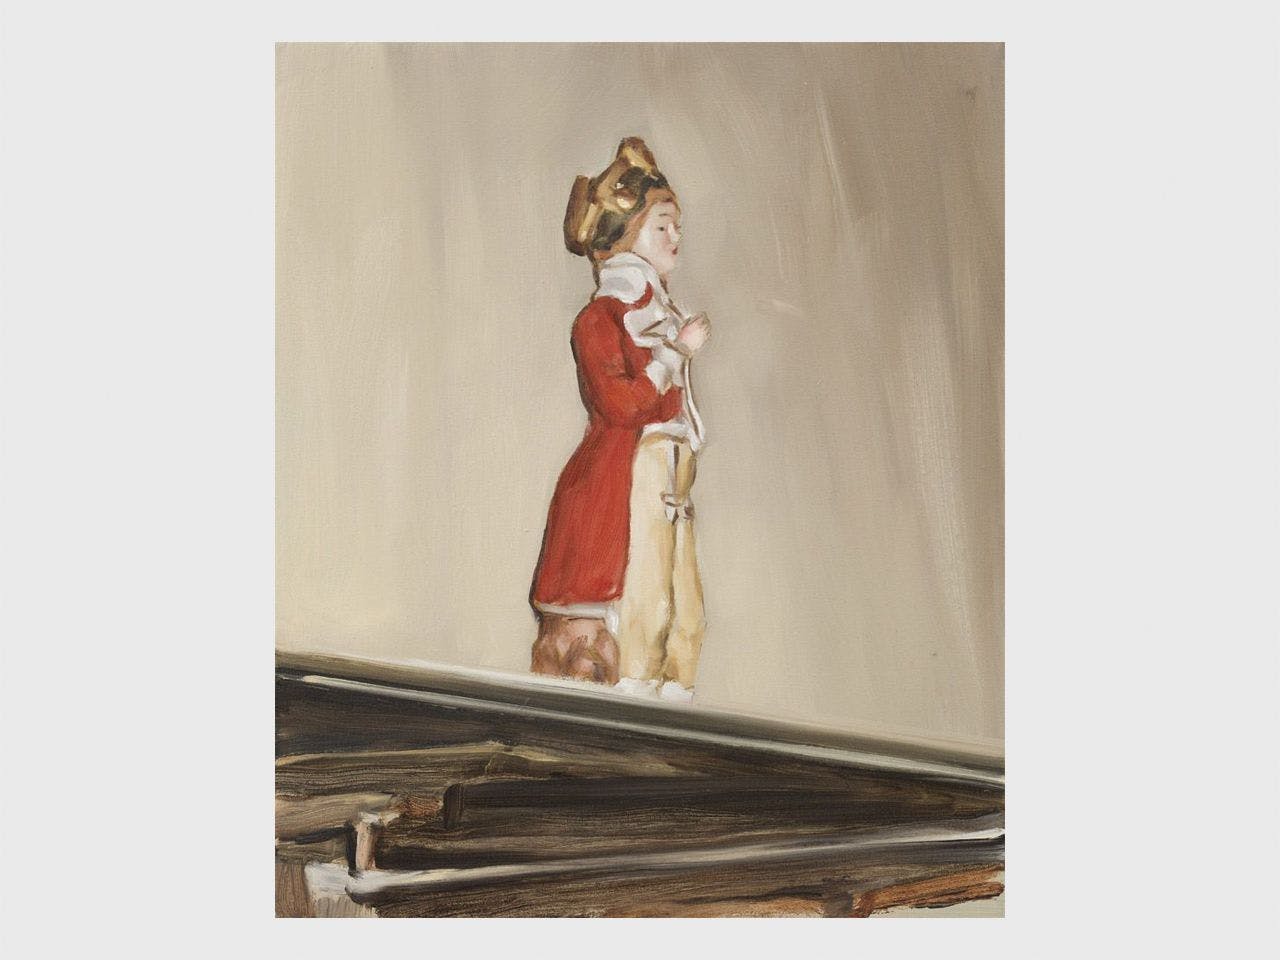 An artwork by Michael Borremans, titled The Visitor, dated 2013